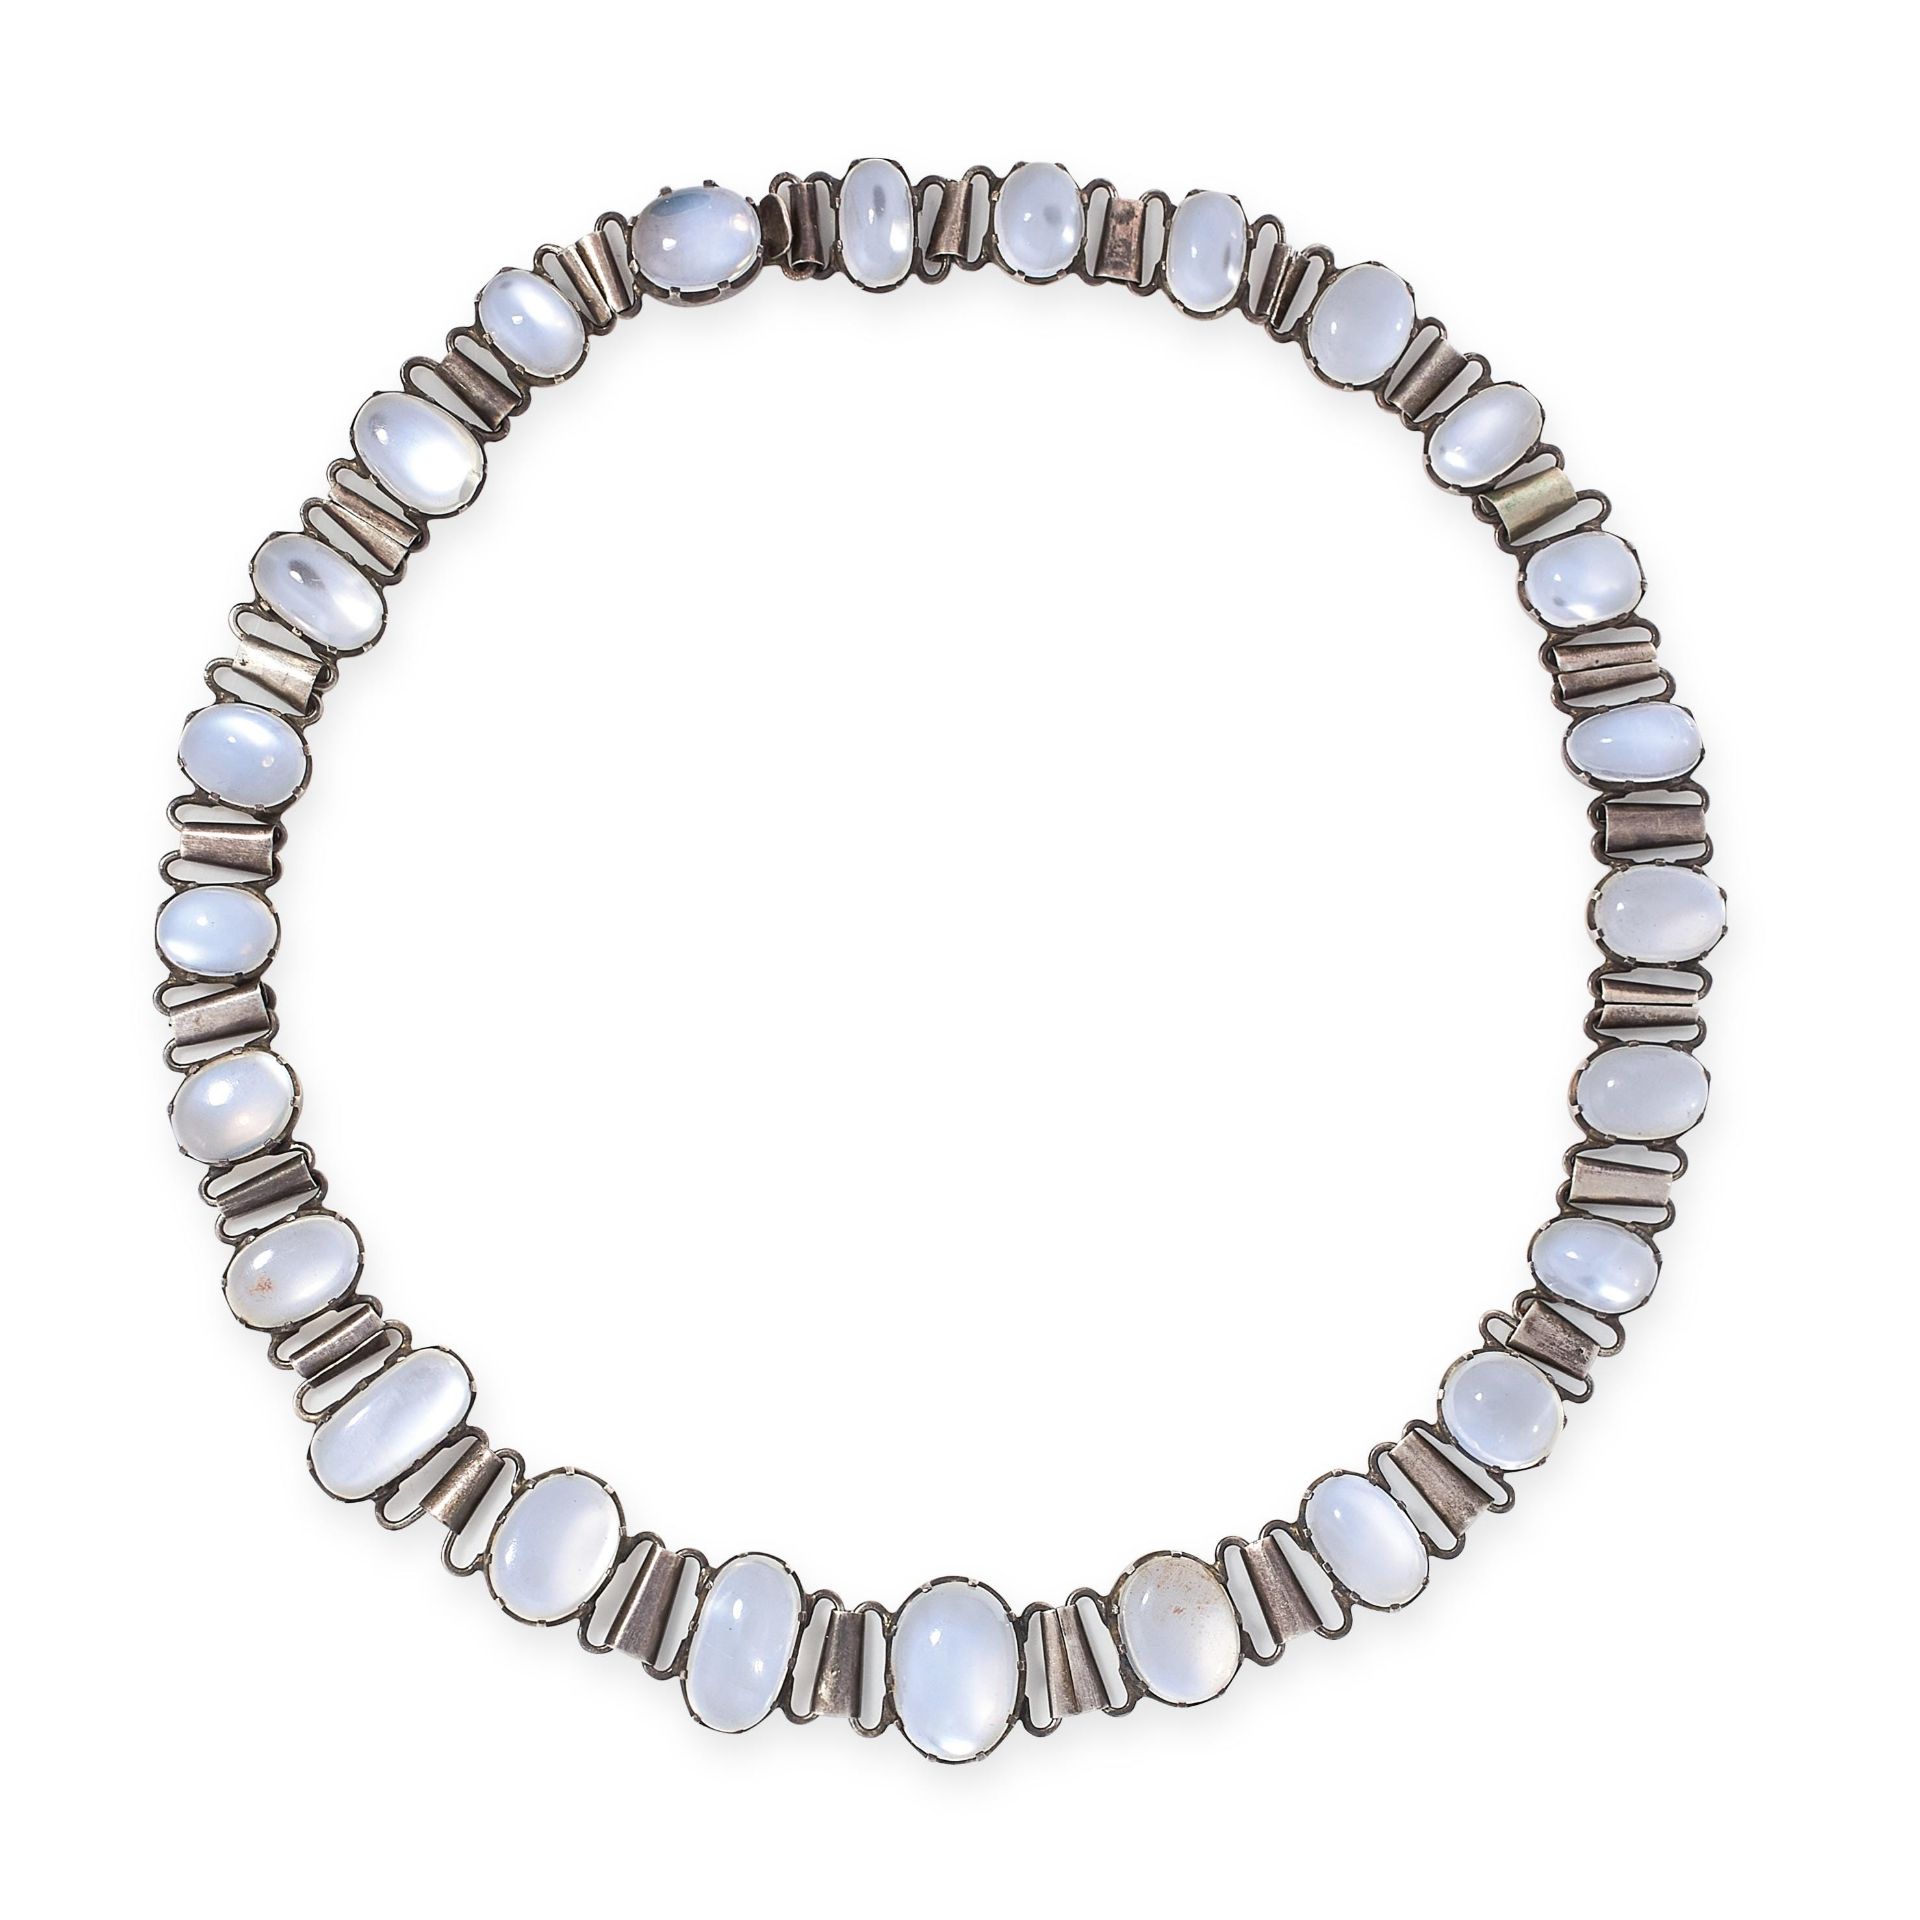 A MOONSTONE COLLAR NECKLACE, EARLY 20TH CENTURY in silver, comprising a row of graduated oval